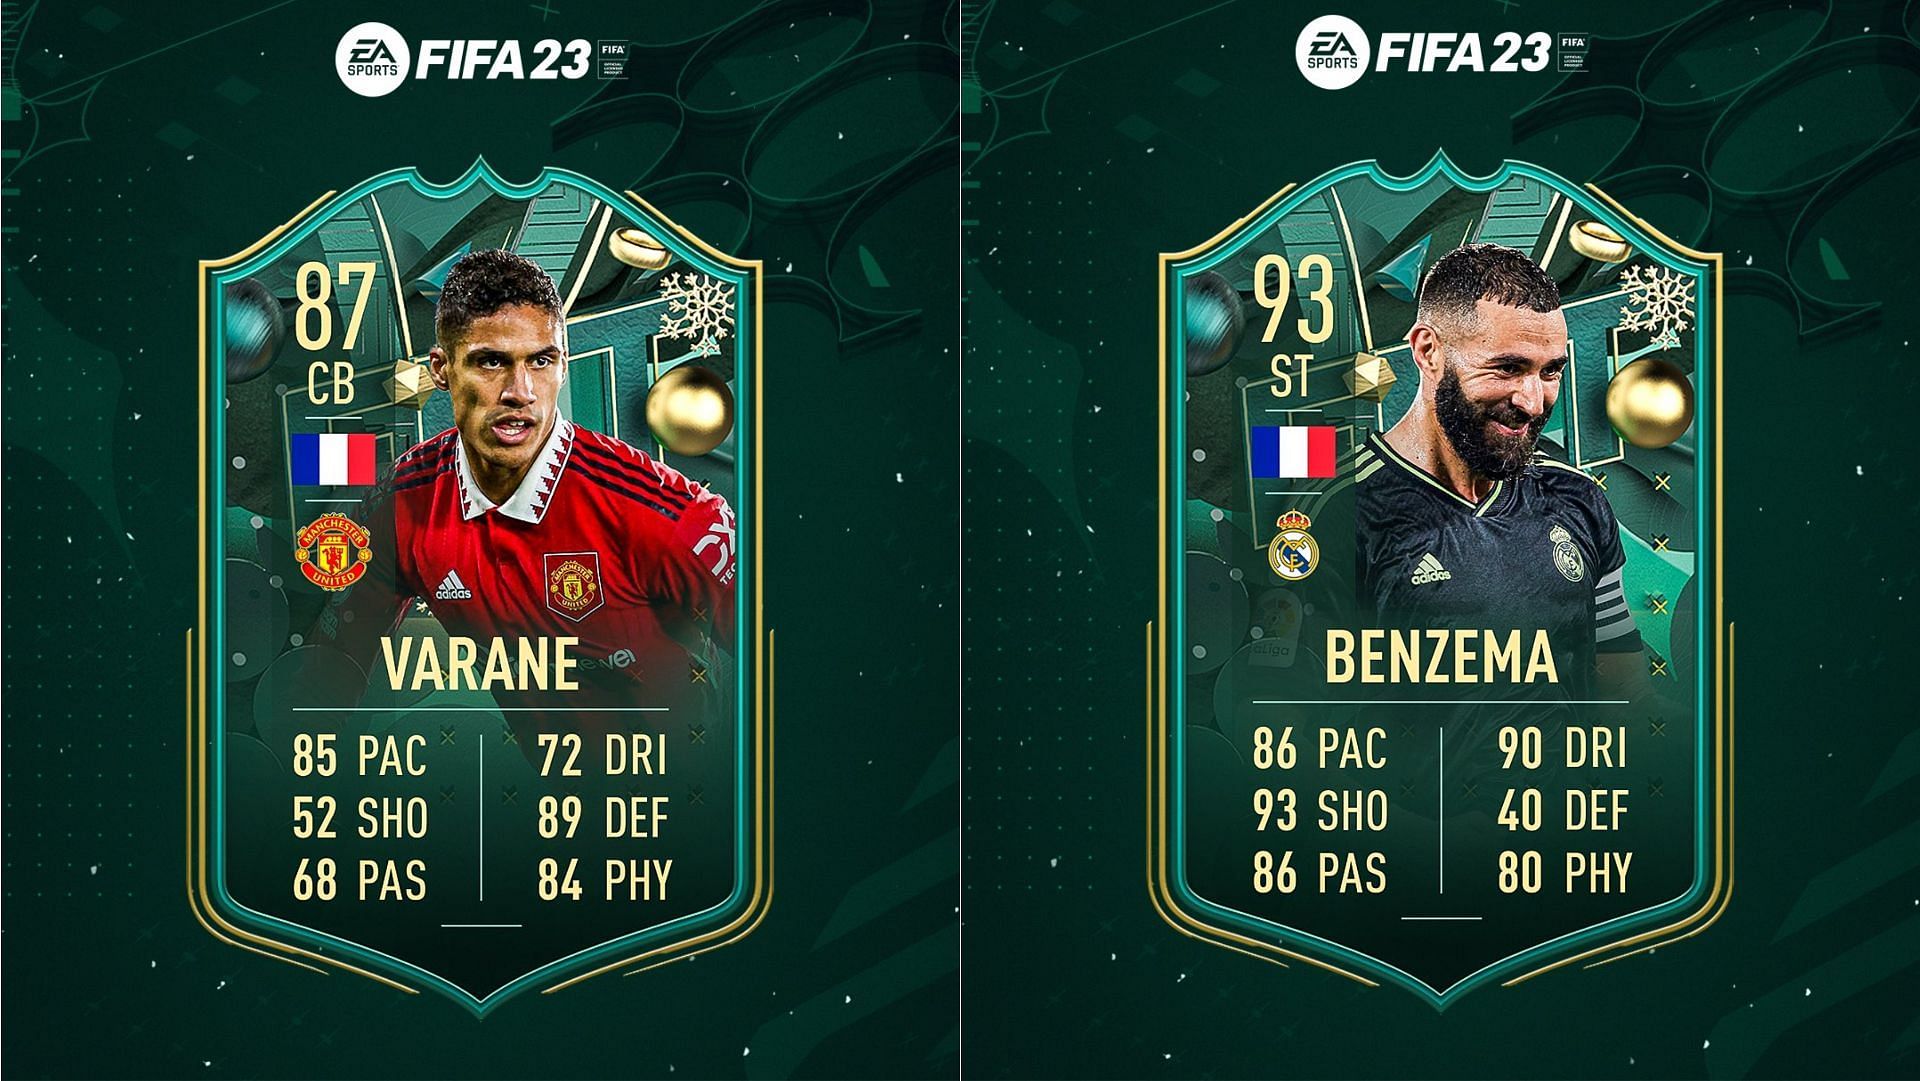 Fifa 22 Leaks Twitter All FIFA 23 Winter Wildcards leaks featuring Varane, Benzema, and more